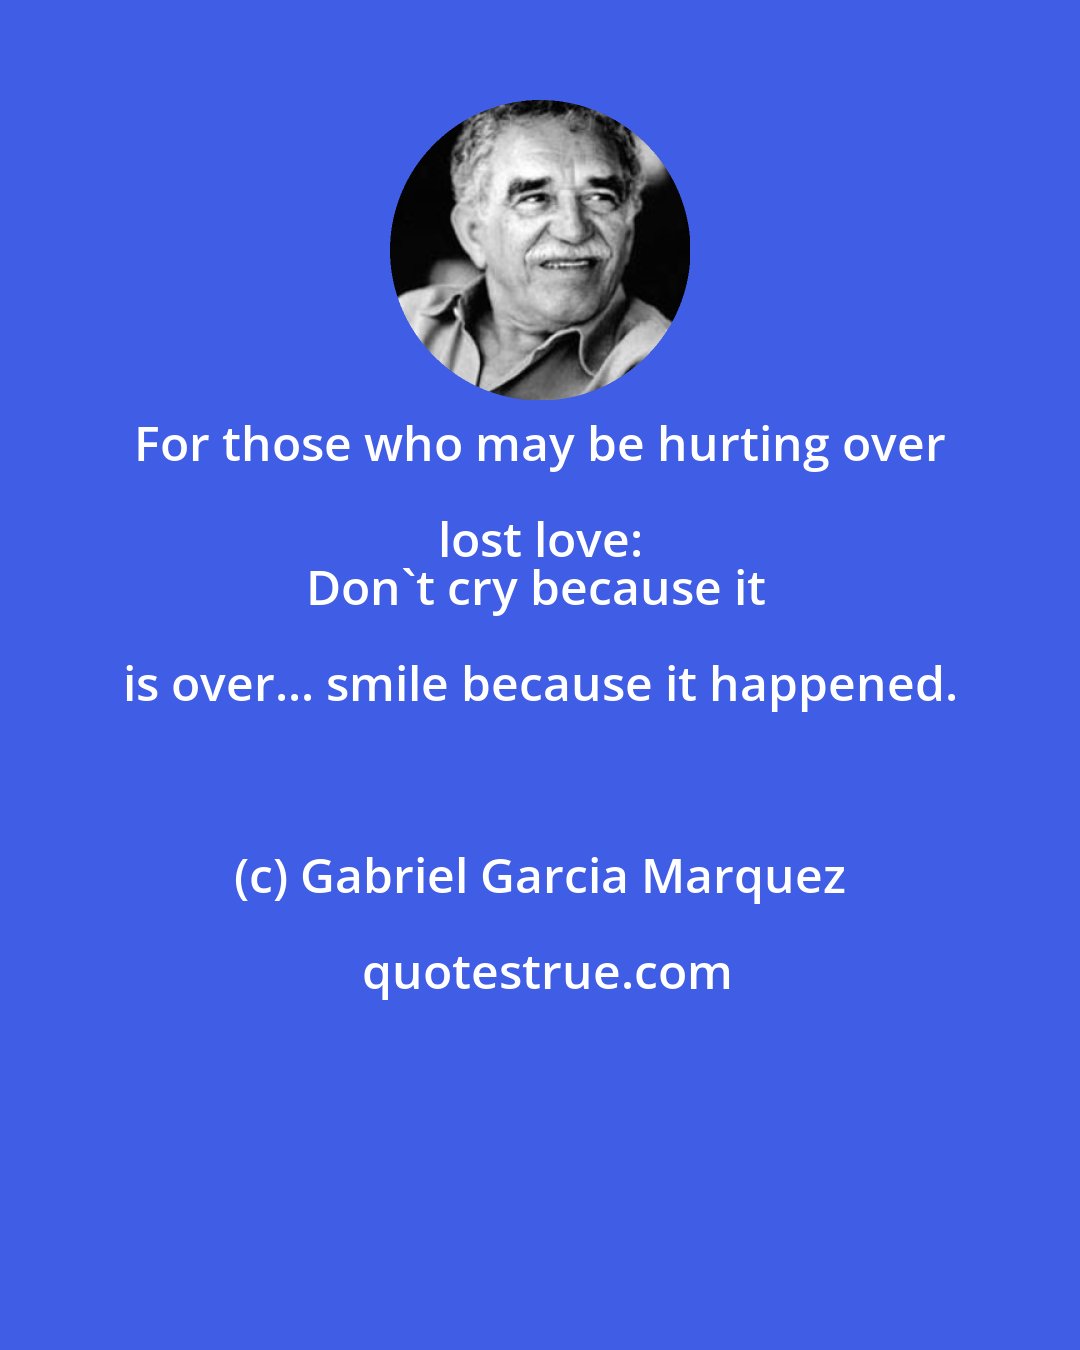 Gabriel Garcia Marquez: For those who may be hurting over lost love: 
Don't cry because it is over... smile because it happened.